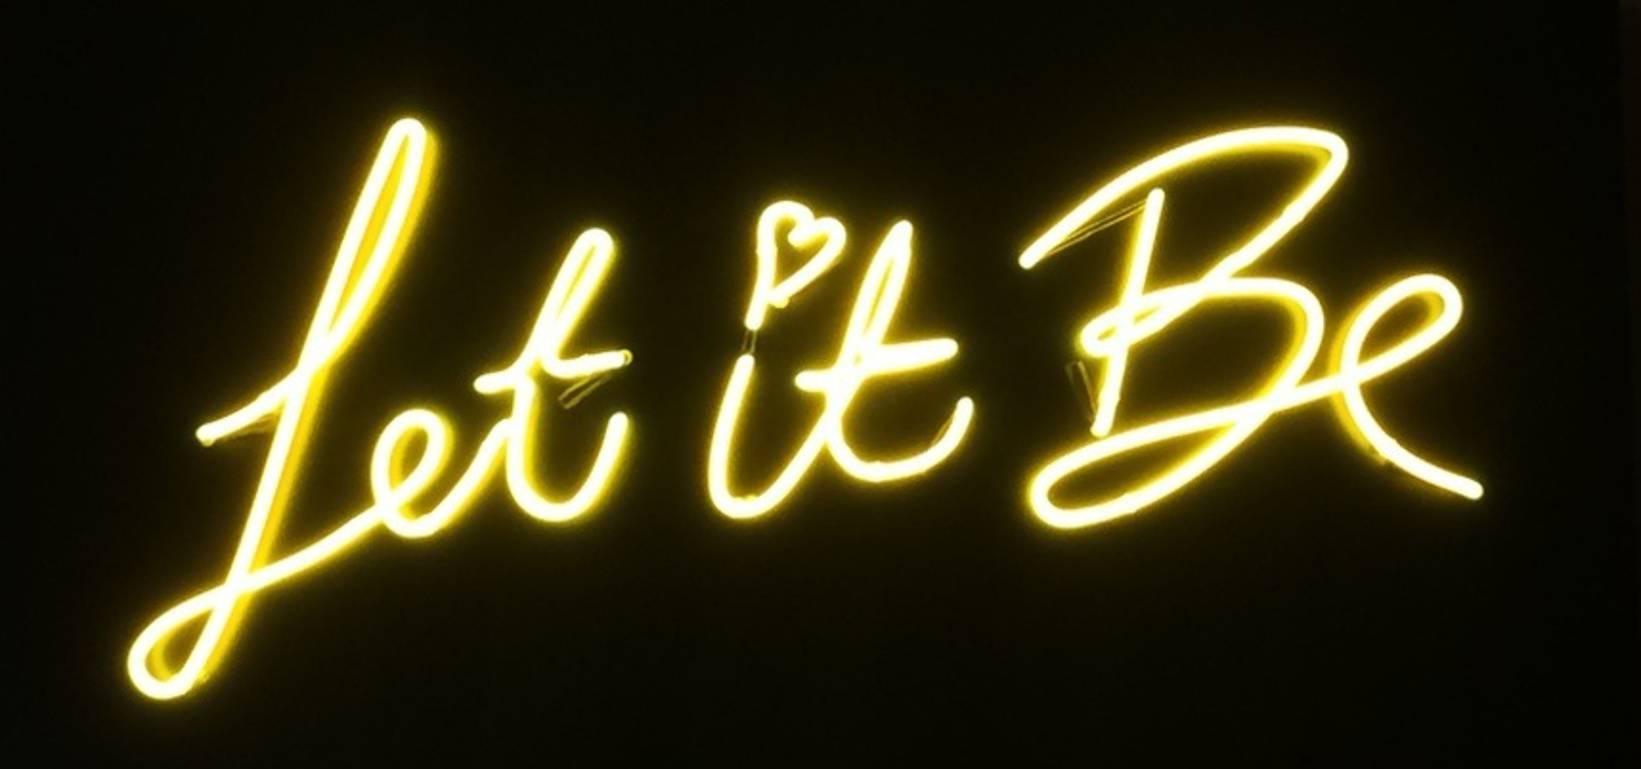 Let it Be - Neon - Mixed Media Art by Chris Bracey